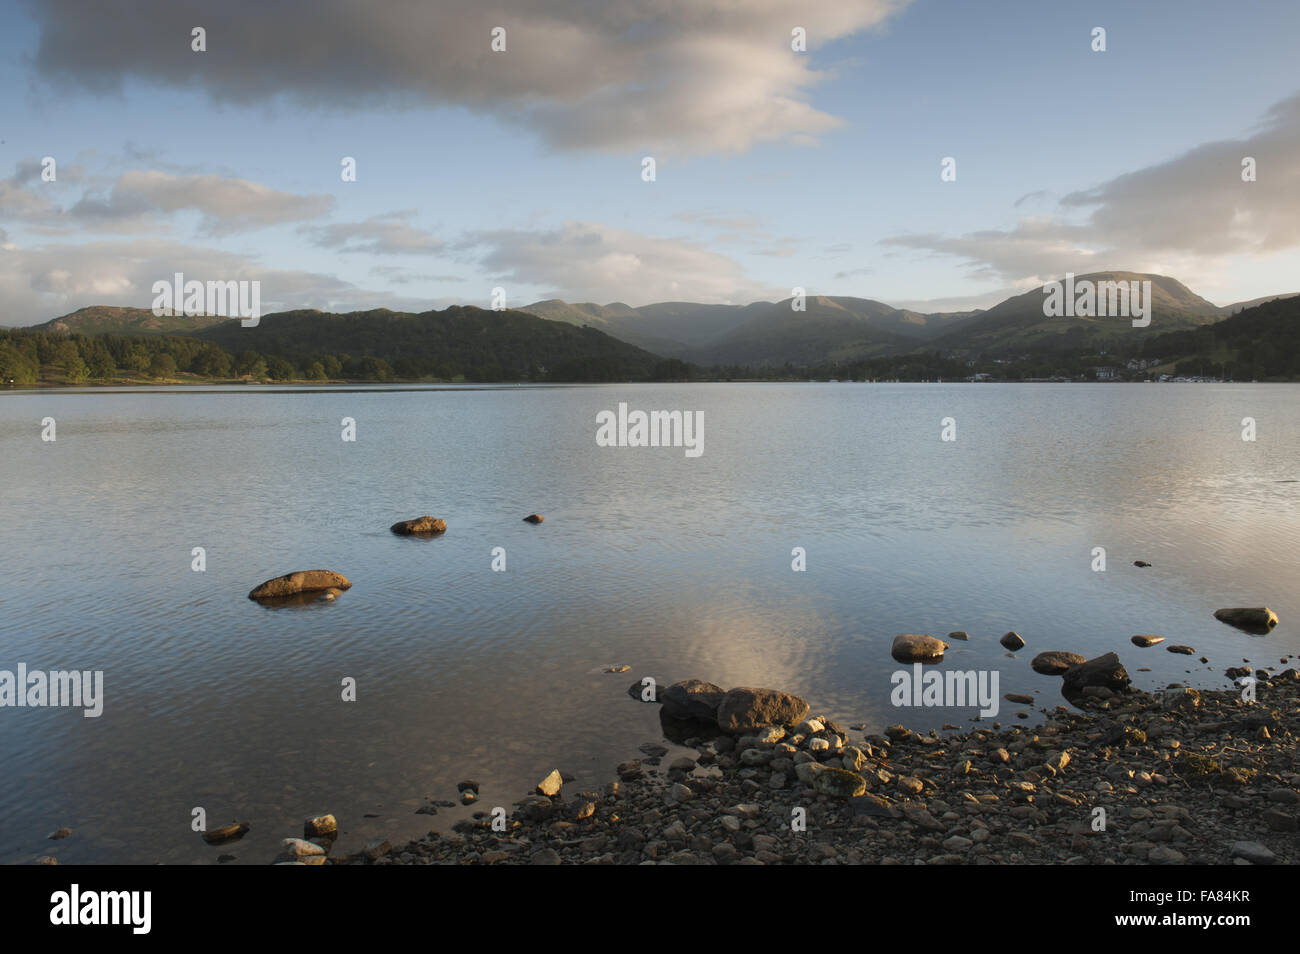 A view of Lake Windermere with Cumbrian fells on the opposite side. Stock Photo